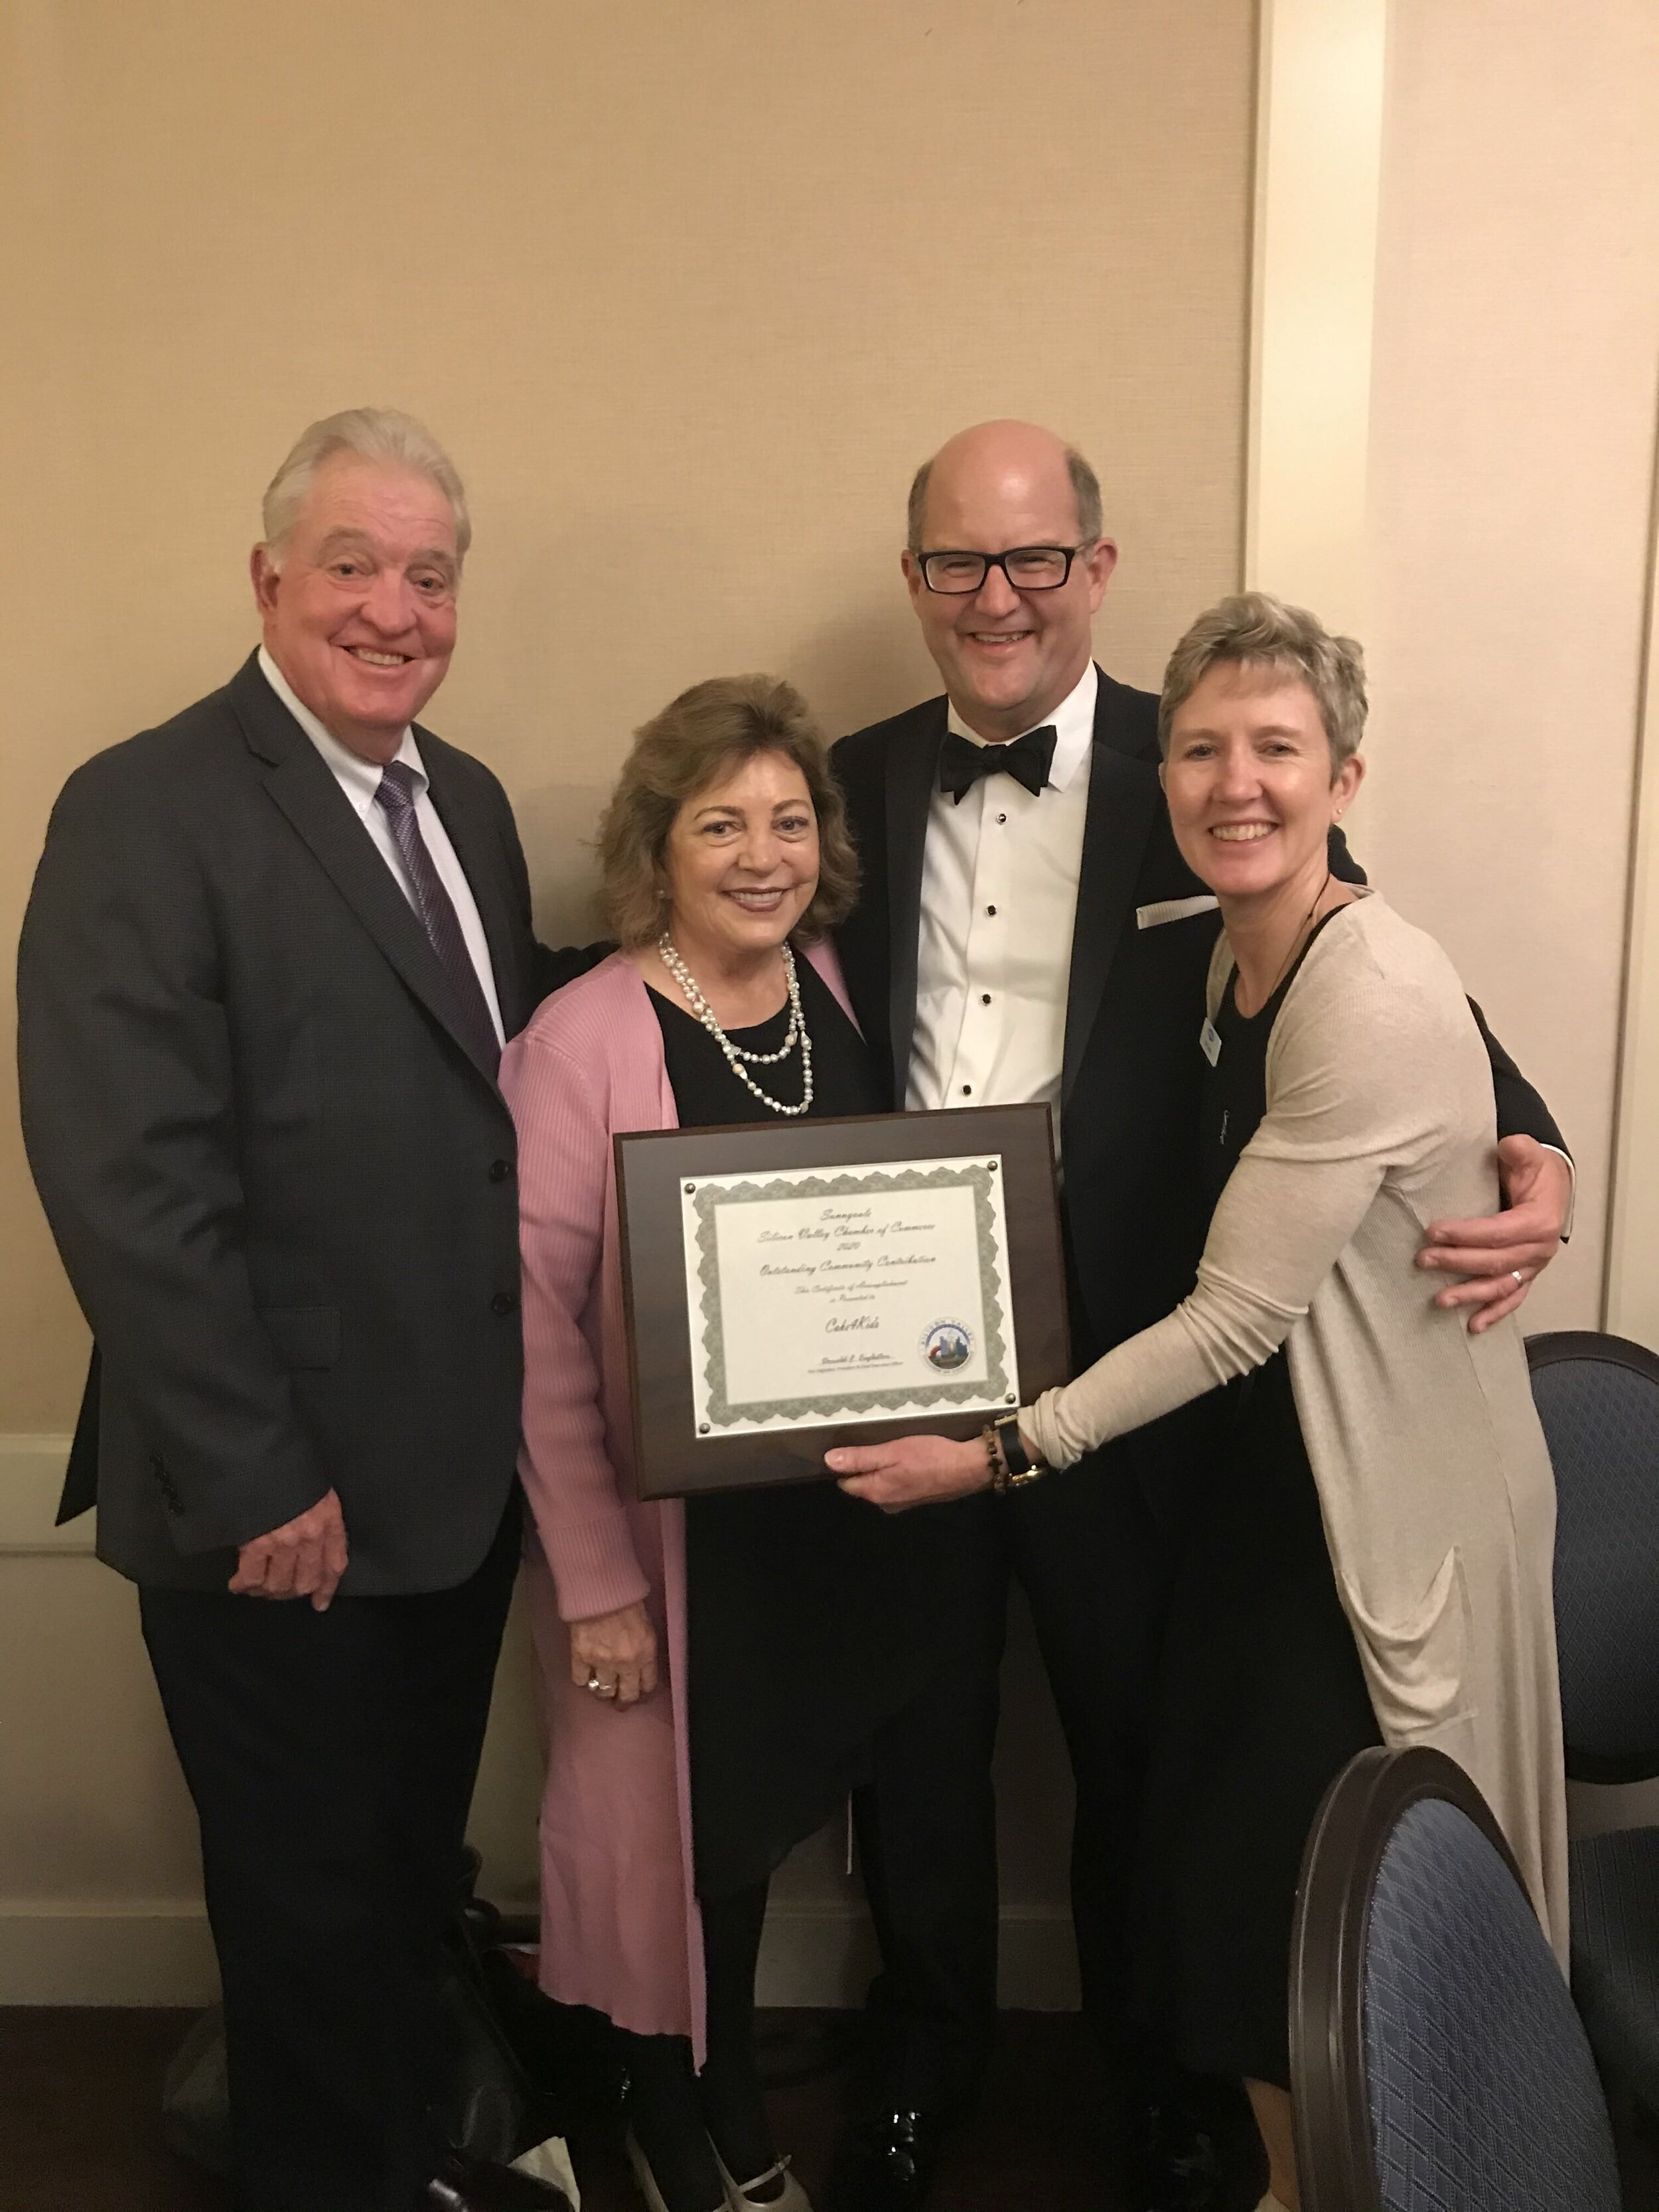  (Left to right) Keith Paulson, Claire Campodonico (Cake4Kids Volunteer), Russ Melton (Councilmember), and Julie Eades (Cake4Kids Executive Director) at the 55th Annual Murphy Awards Dinner on February 22, 2020 in Sunnyvale, CA 